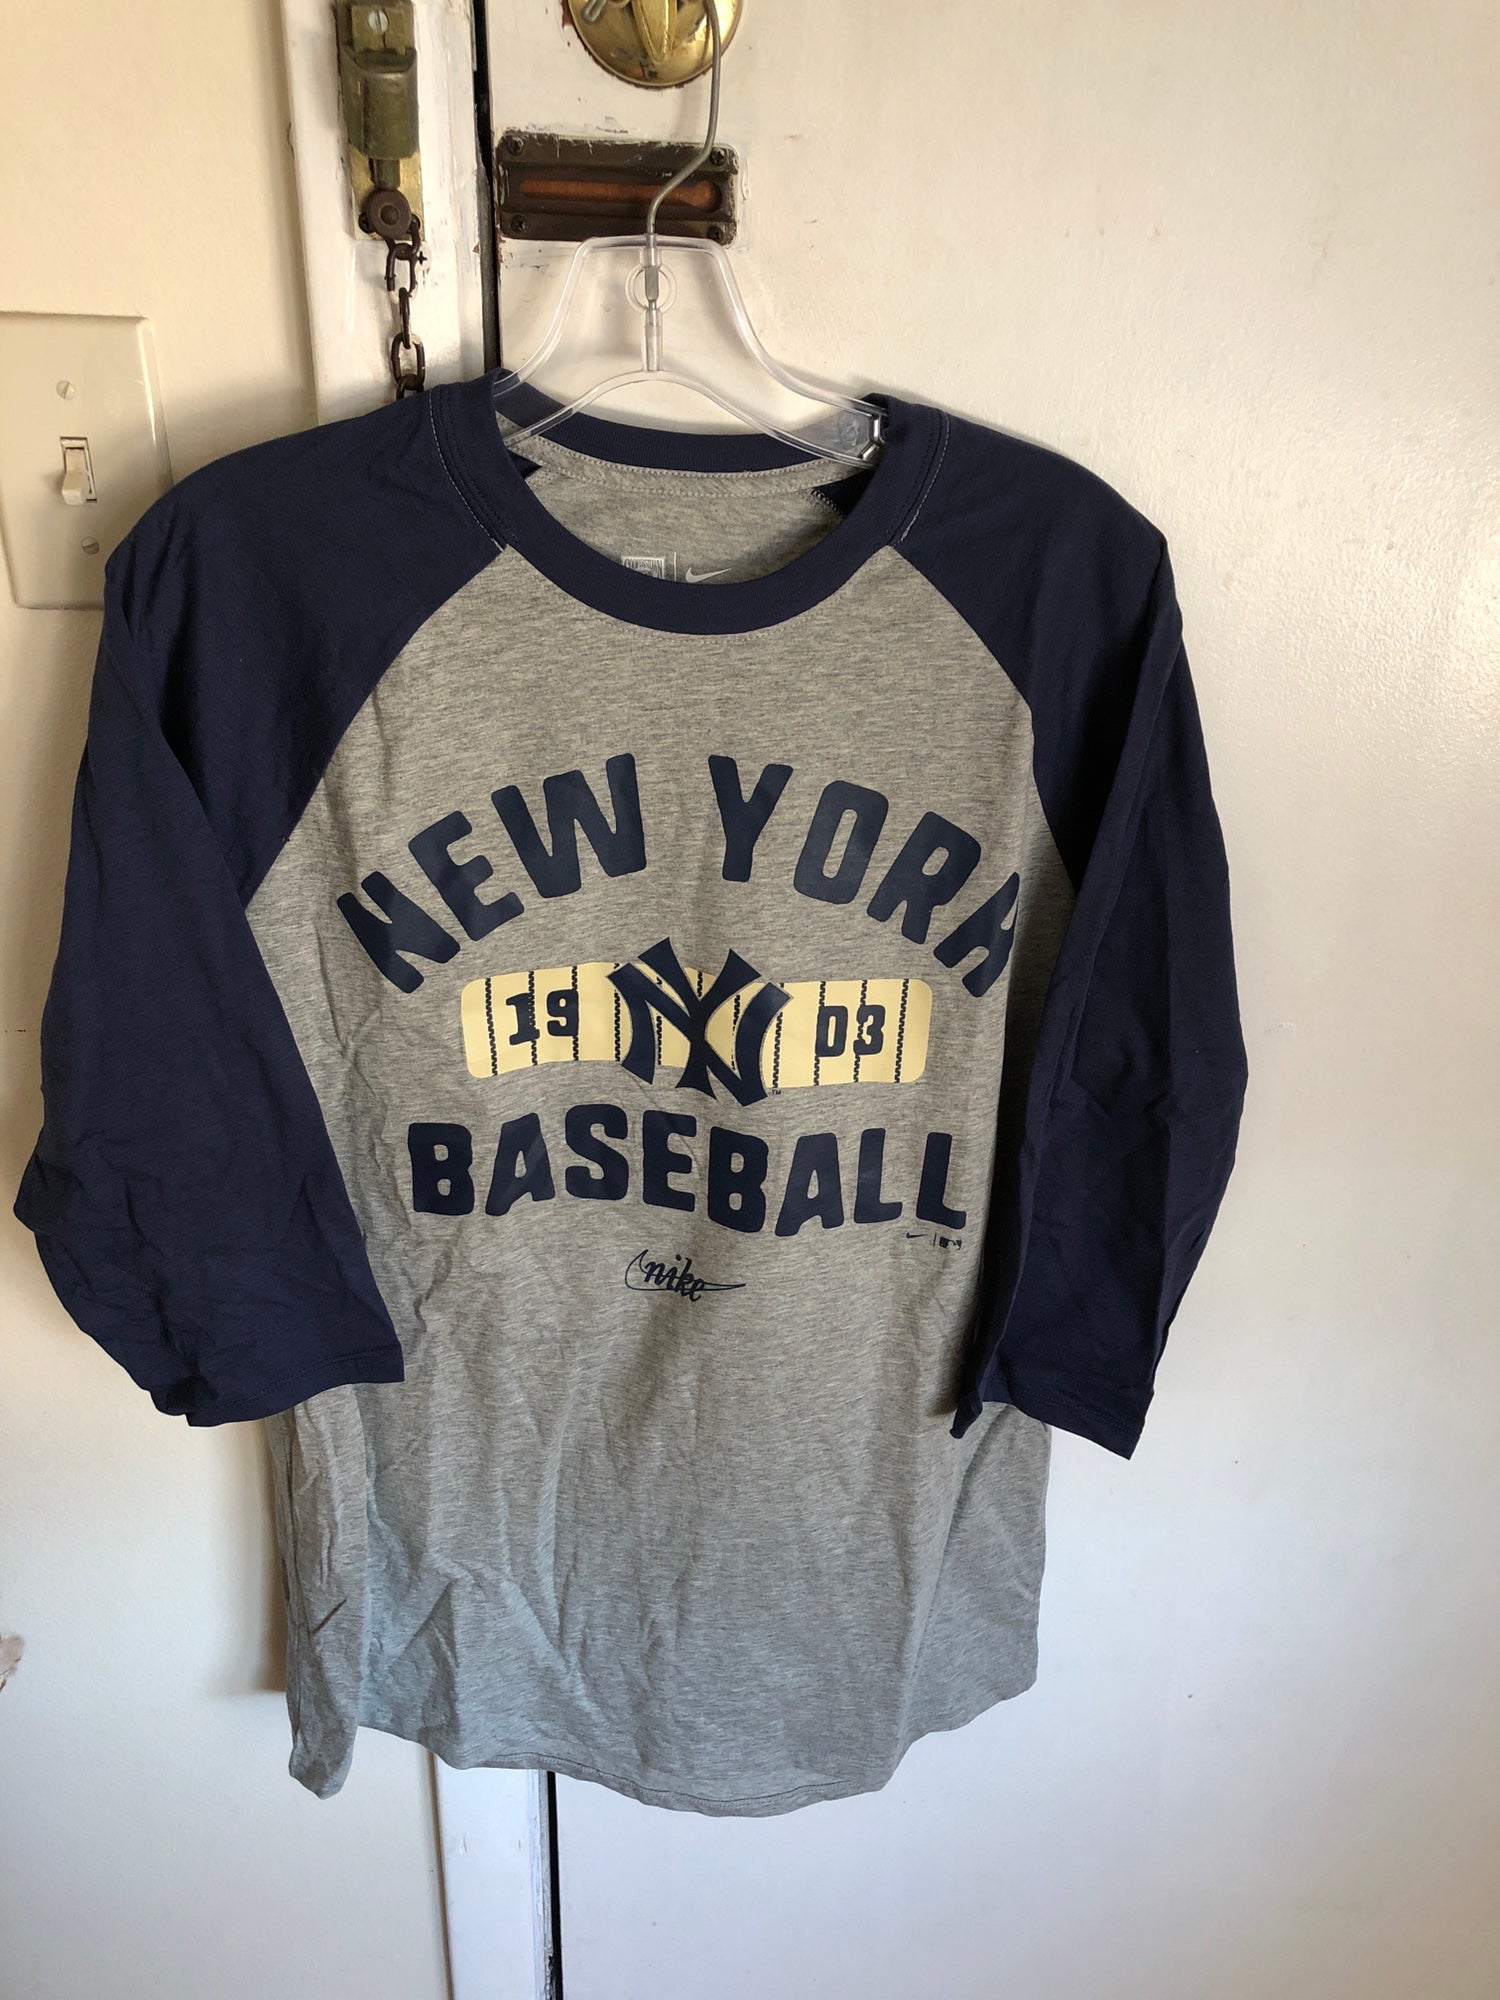 2009-14 NEW YORK YANKEES MAJESTIC JERSEY (HOME) M